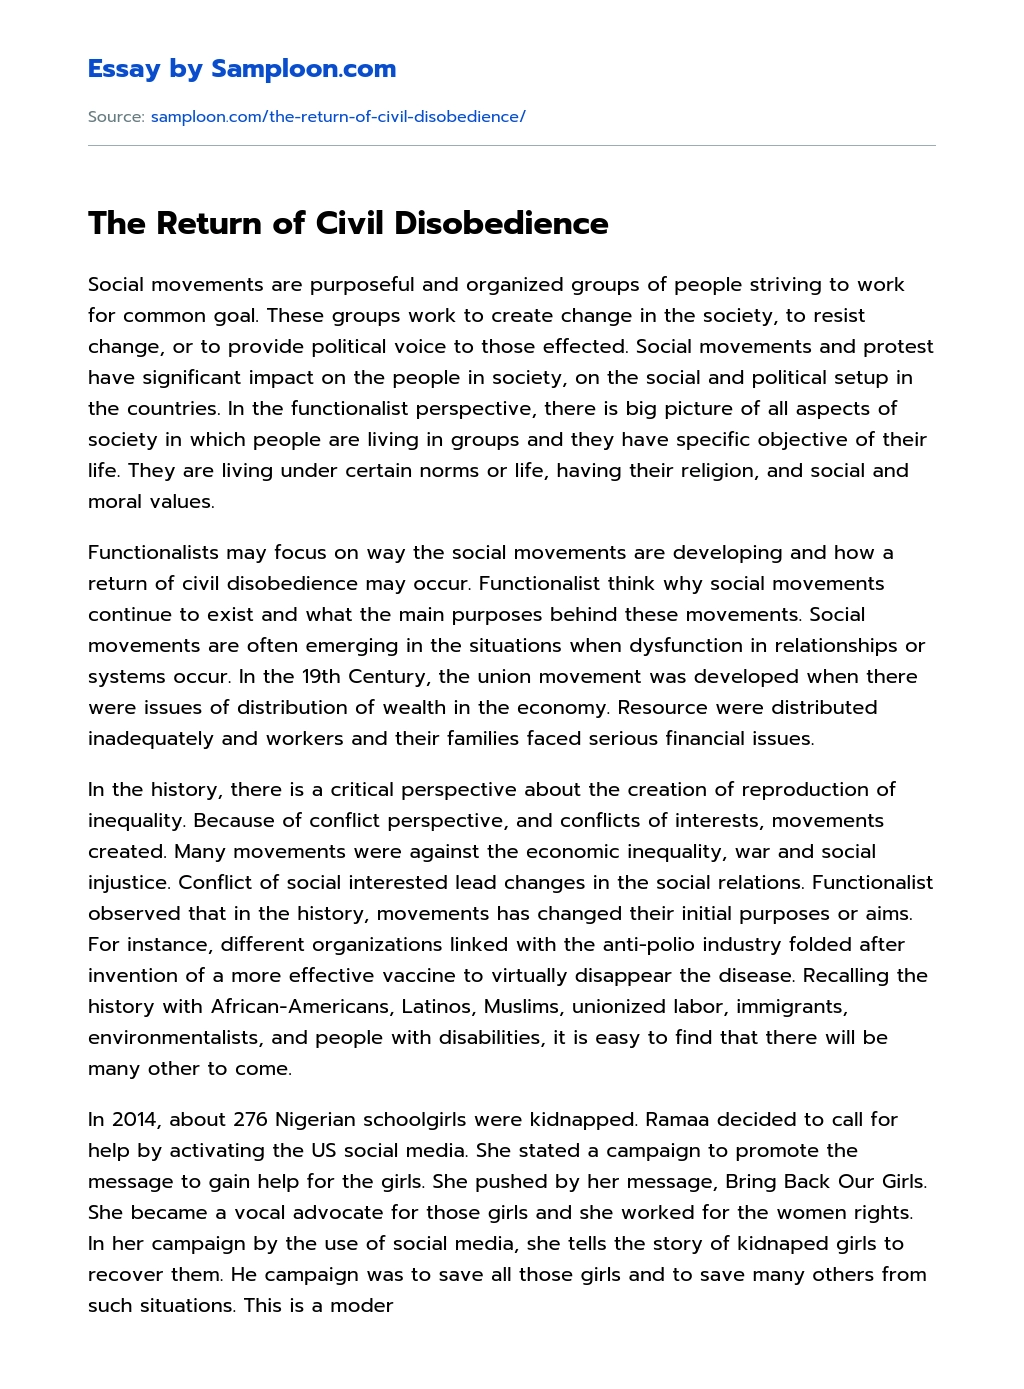 The Return of Civil Disobedience essay